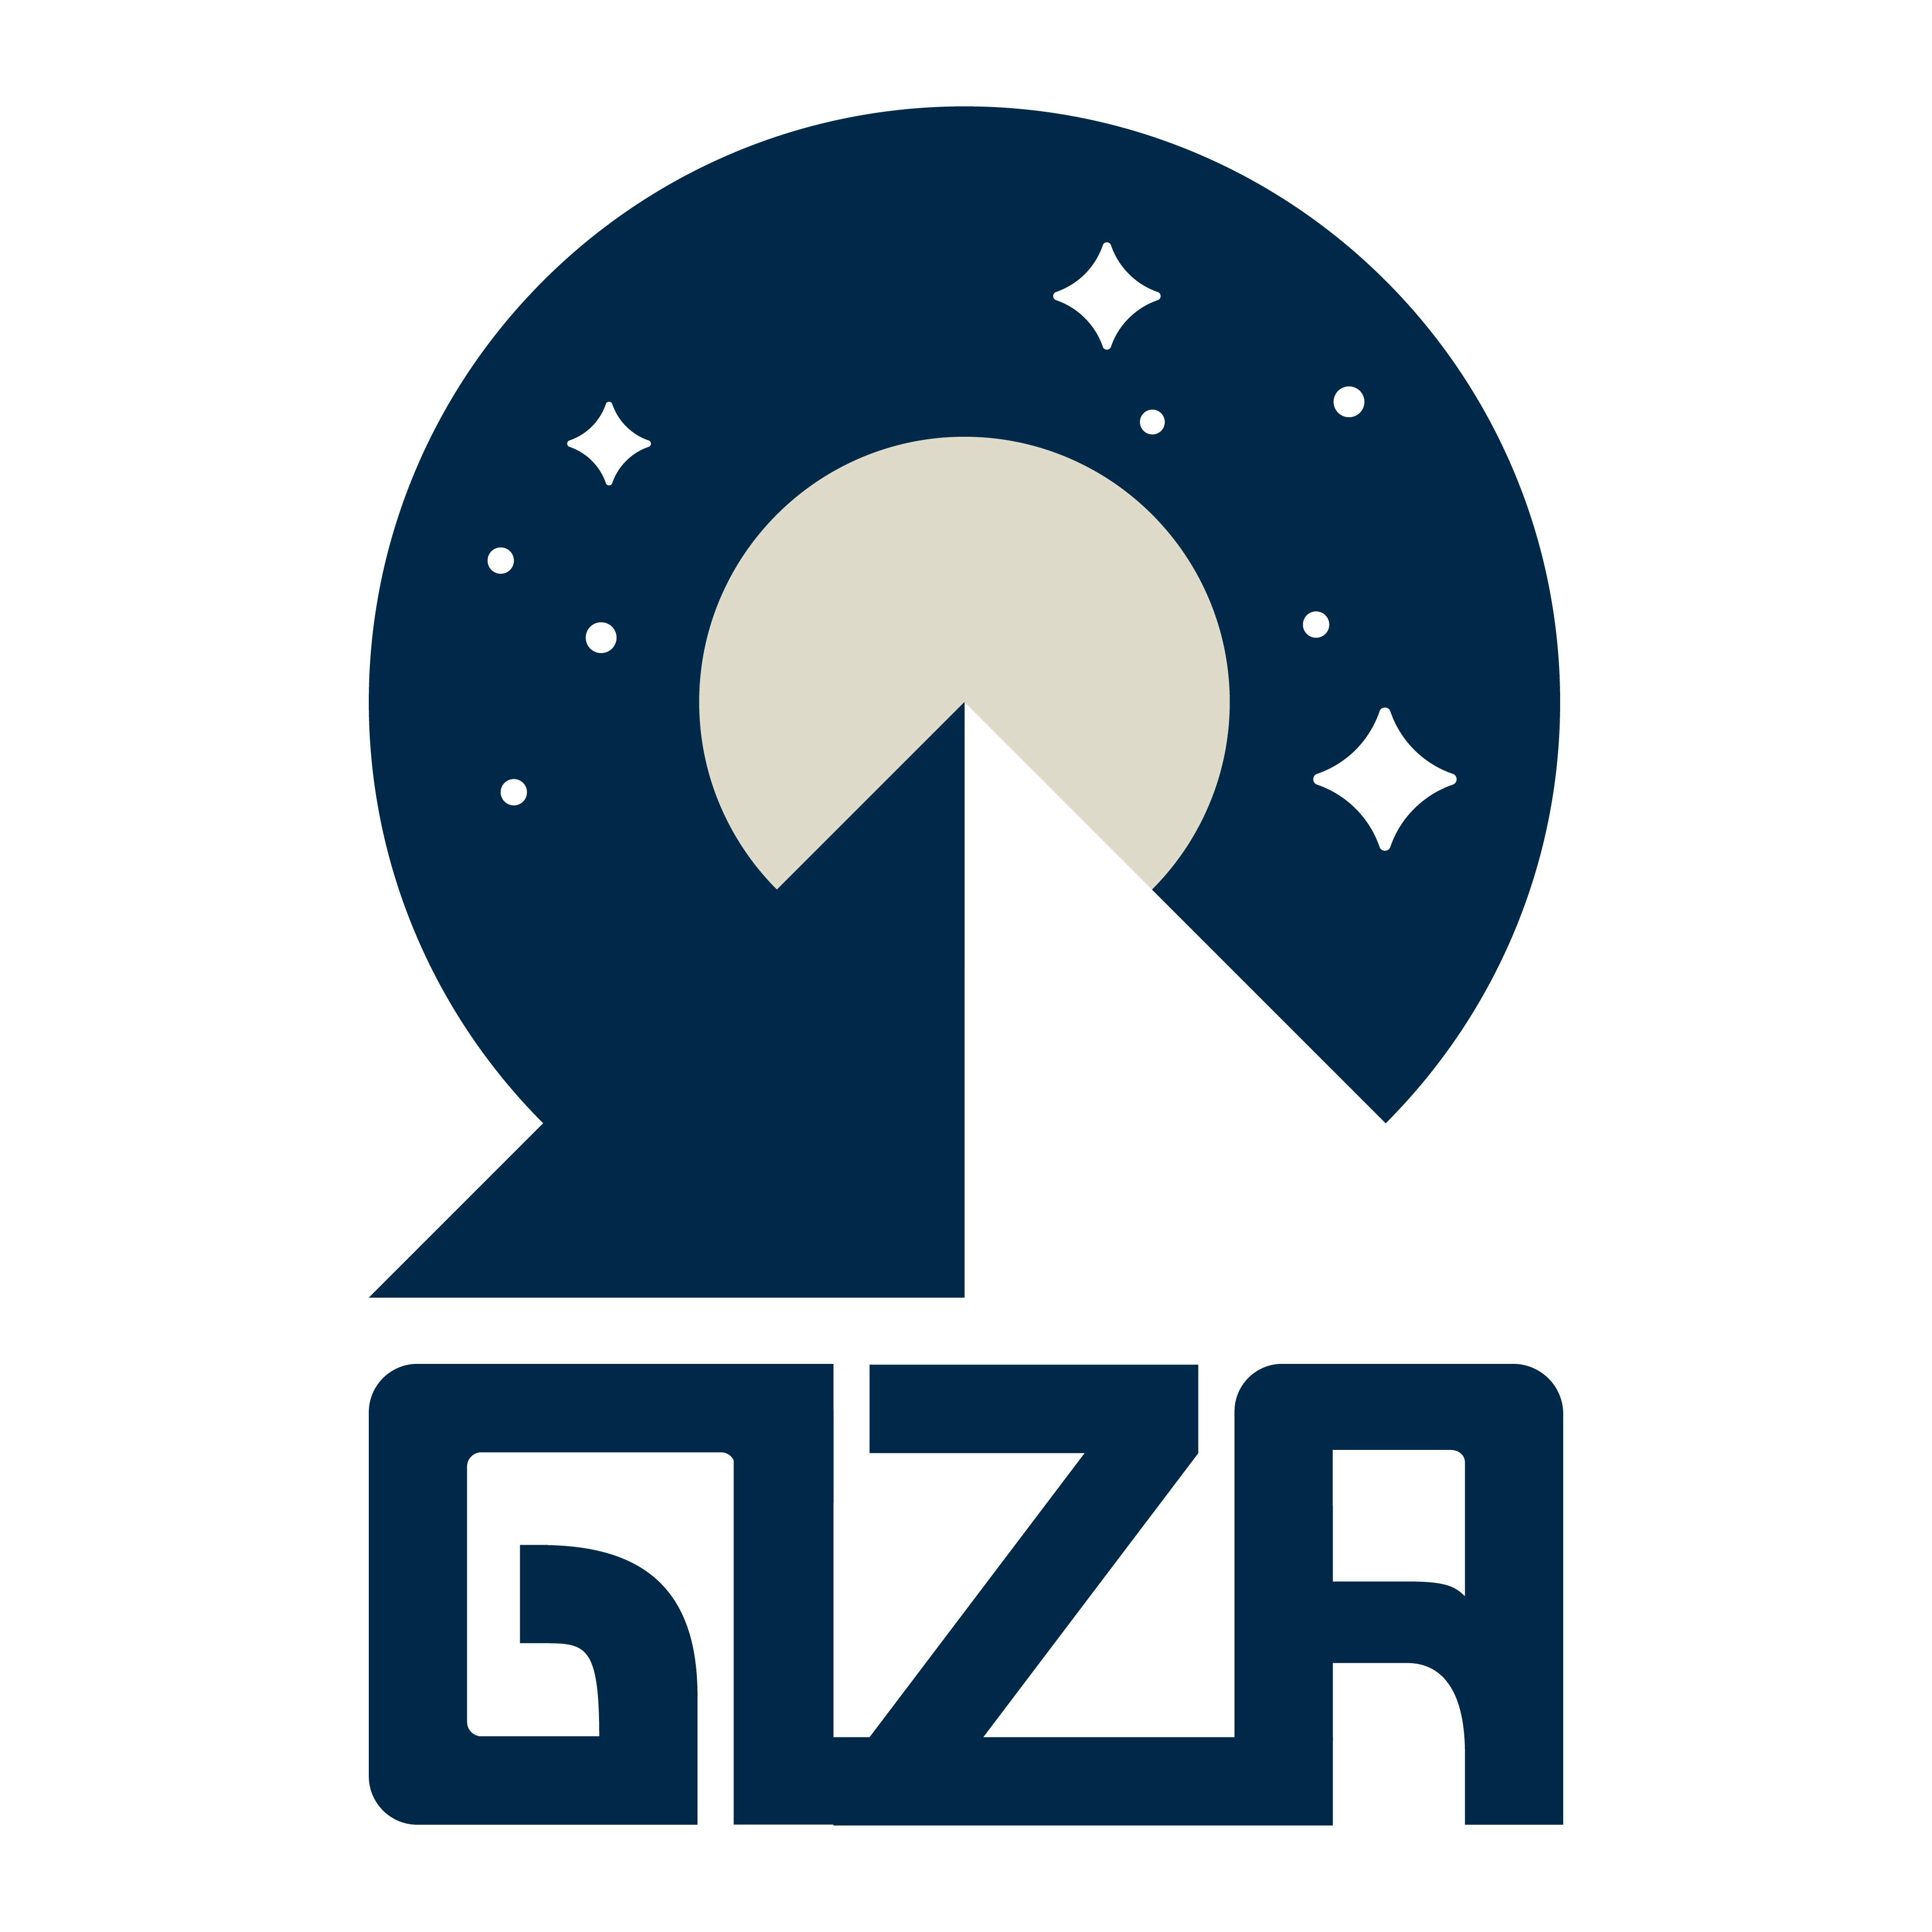 GIZA logo design by logo designer Emanuele Abrate - Logo & Identity designer for your inspiration and for the worlds largest logo competition